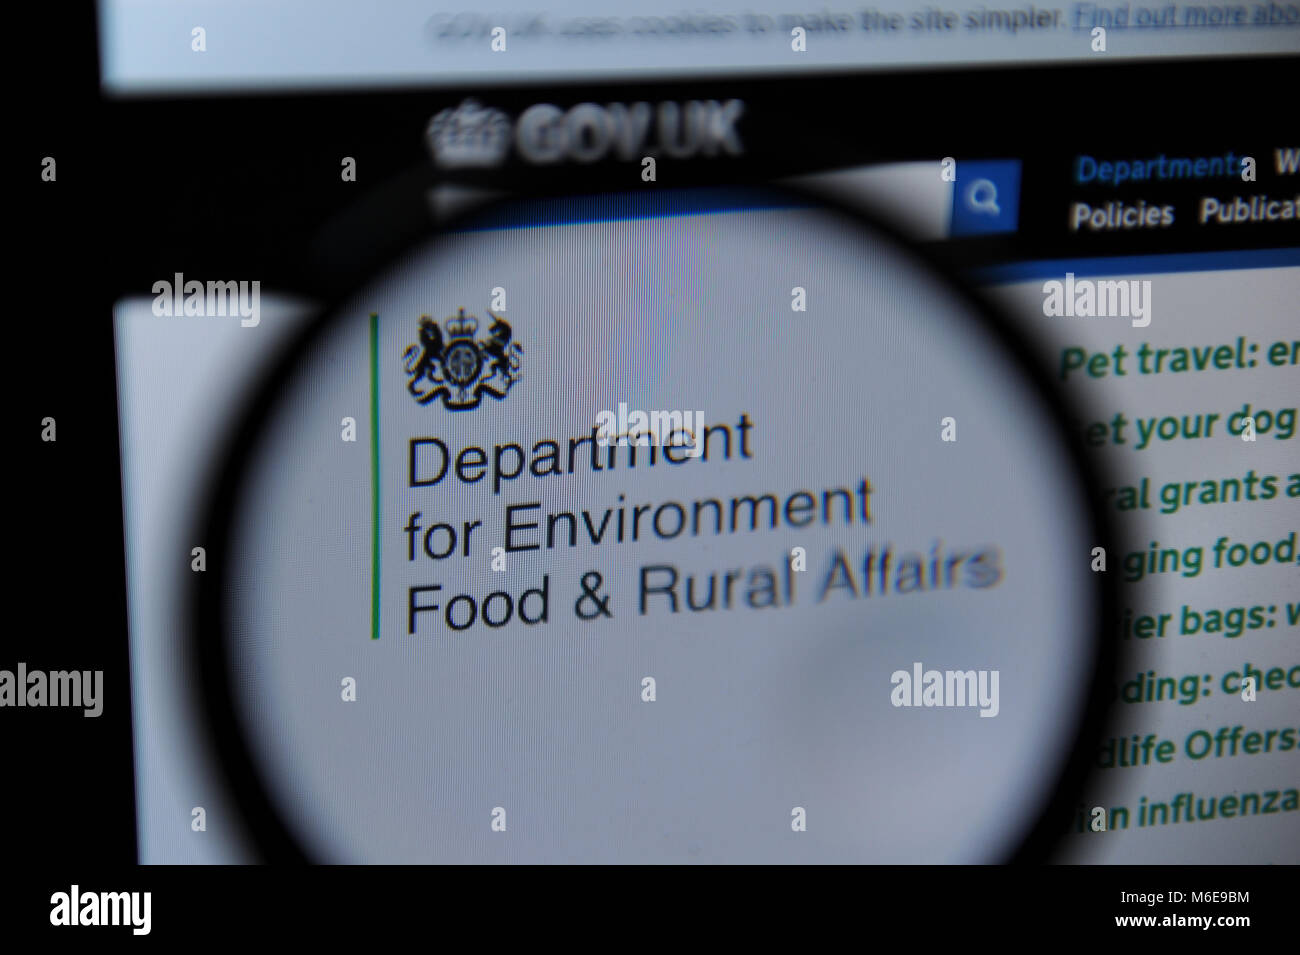 Department for Environment Foot & Rural Affairs Stock Photo